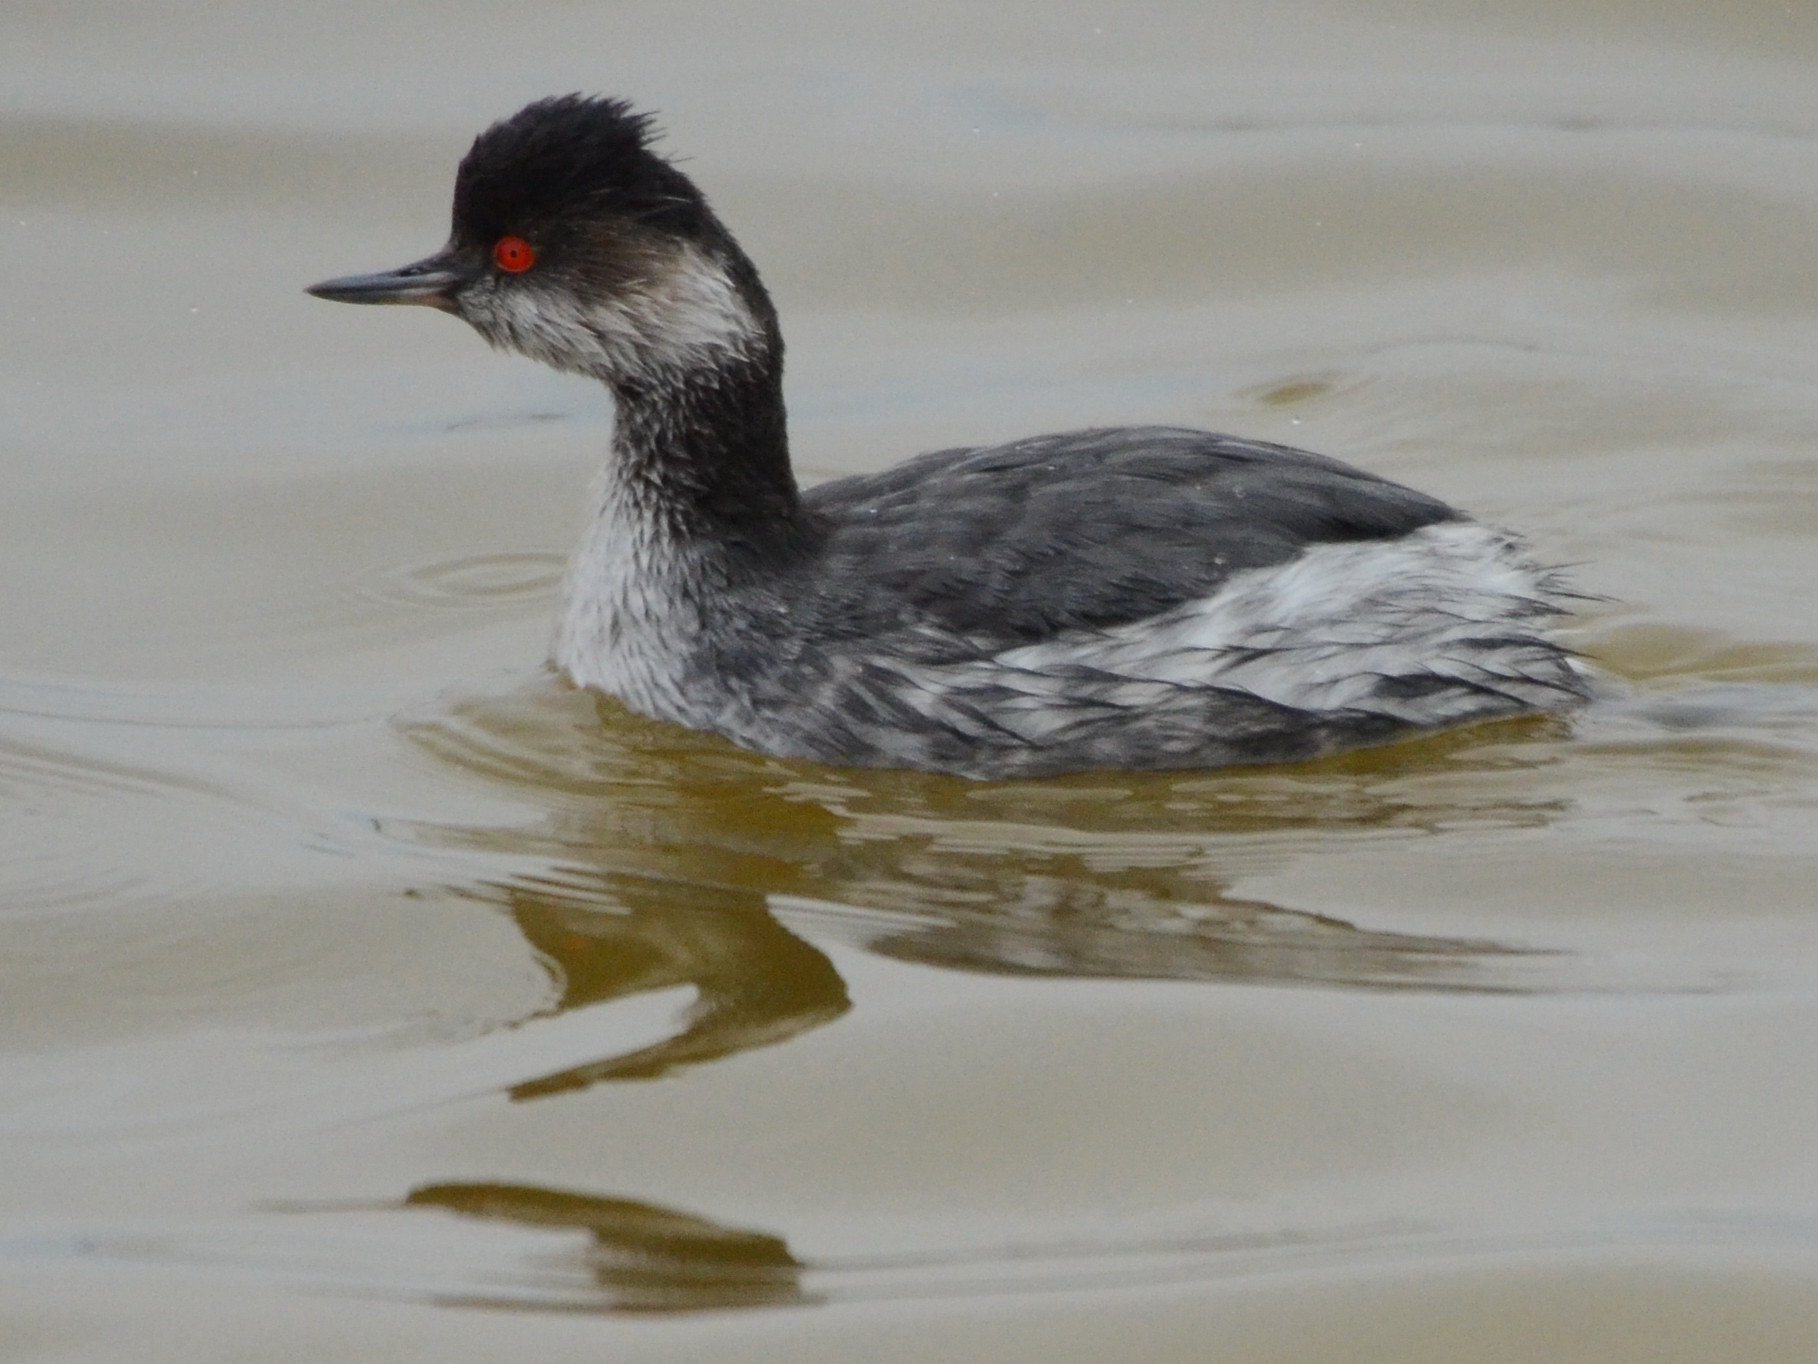 Click picture to see more Eared Grebes.